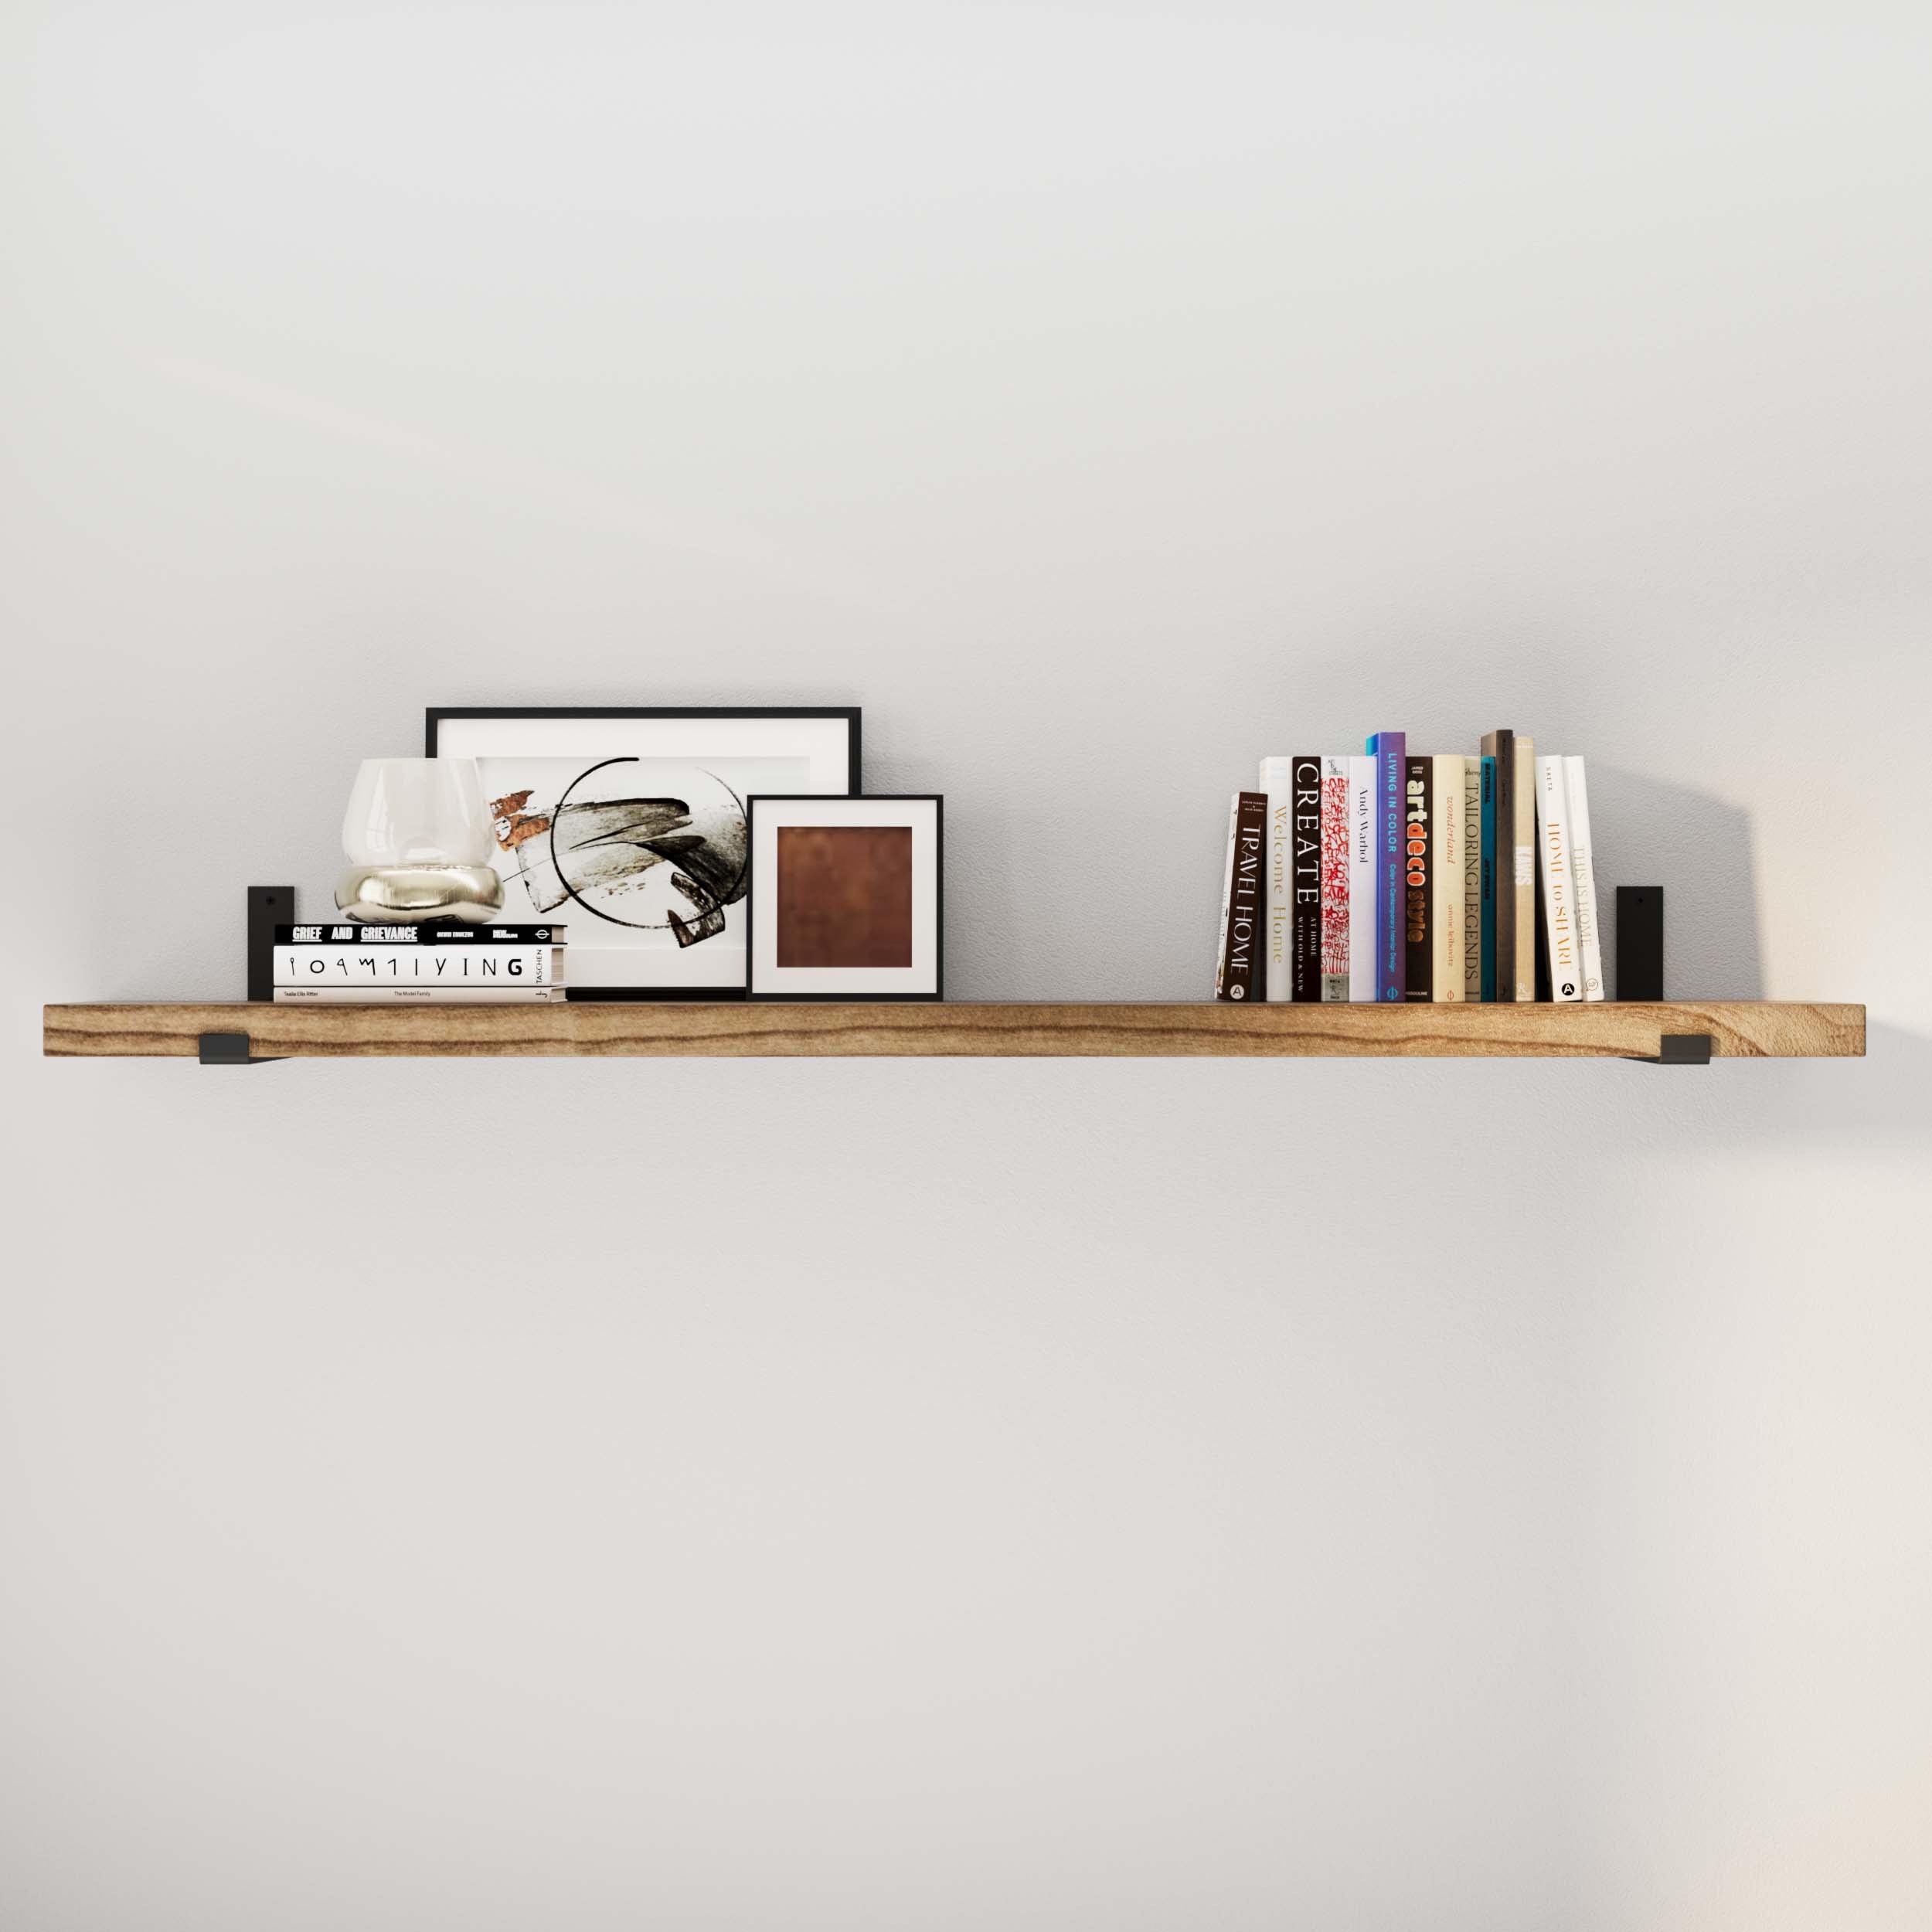 60'' hanging shelf displaying books, art, and a decorative beetle.